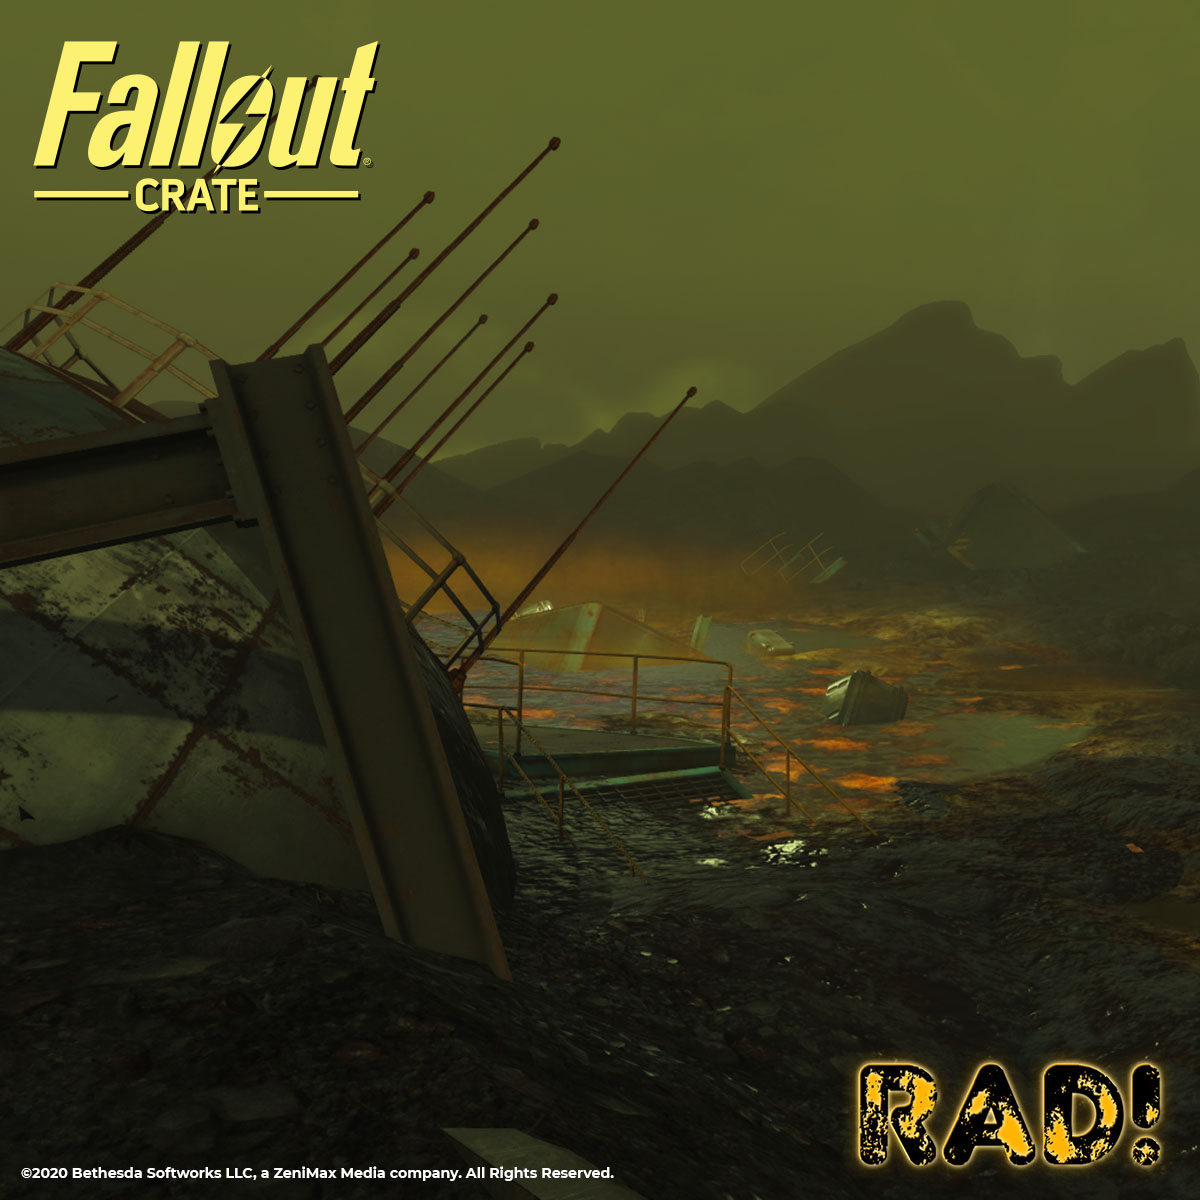 The Daily Crate | THEME REVEAL: Fallout Has a RAD New Theme!